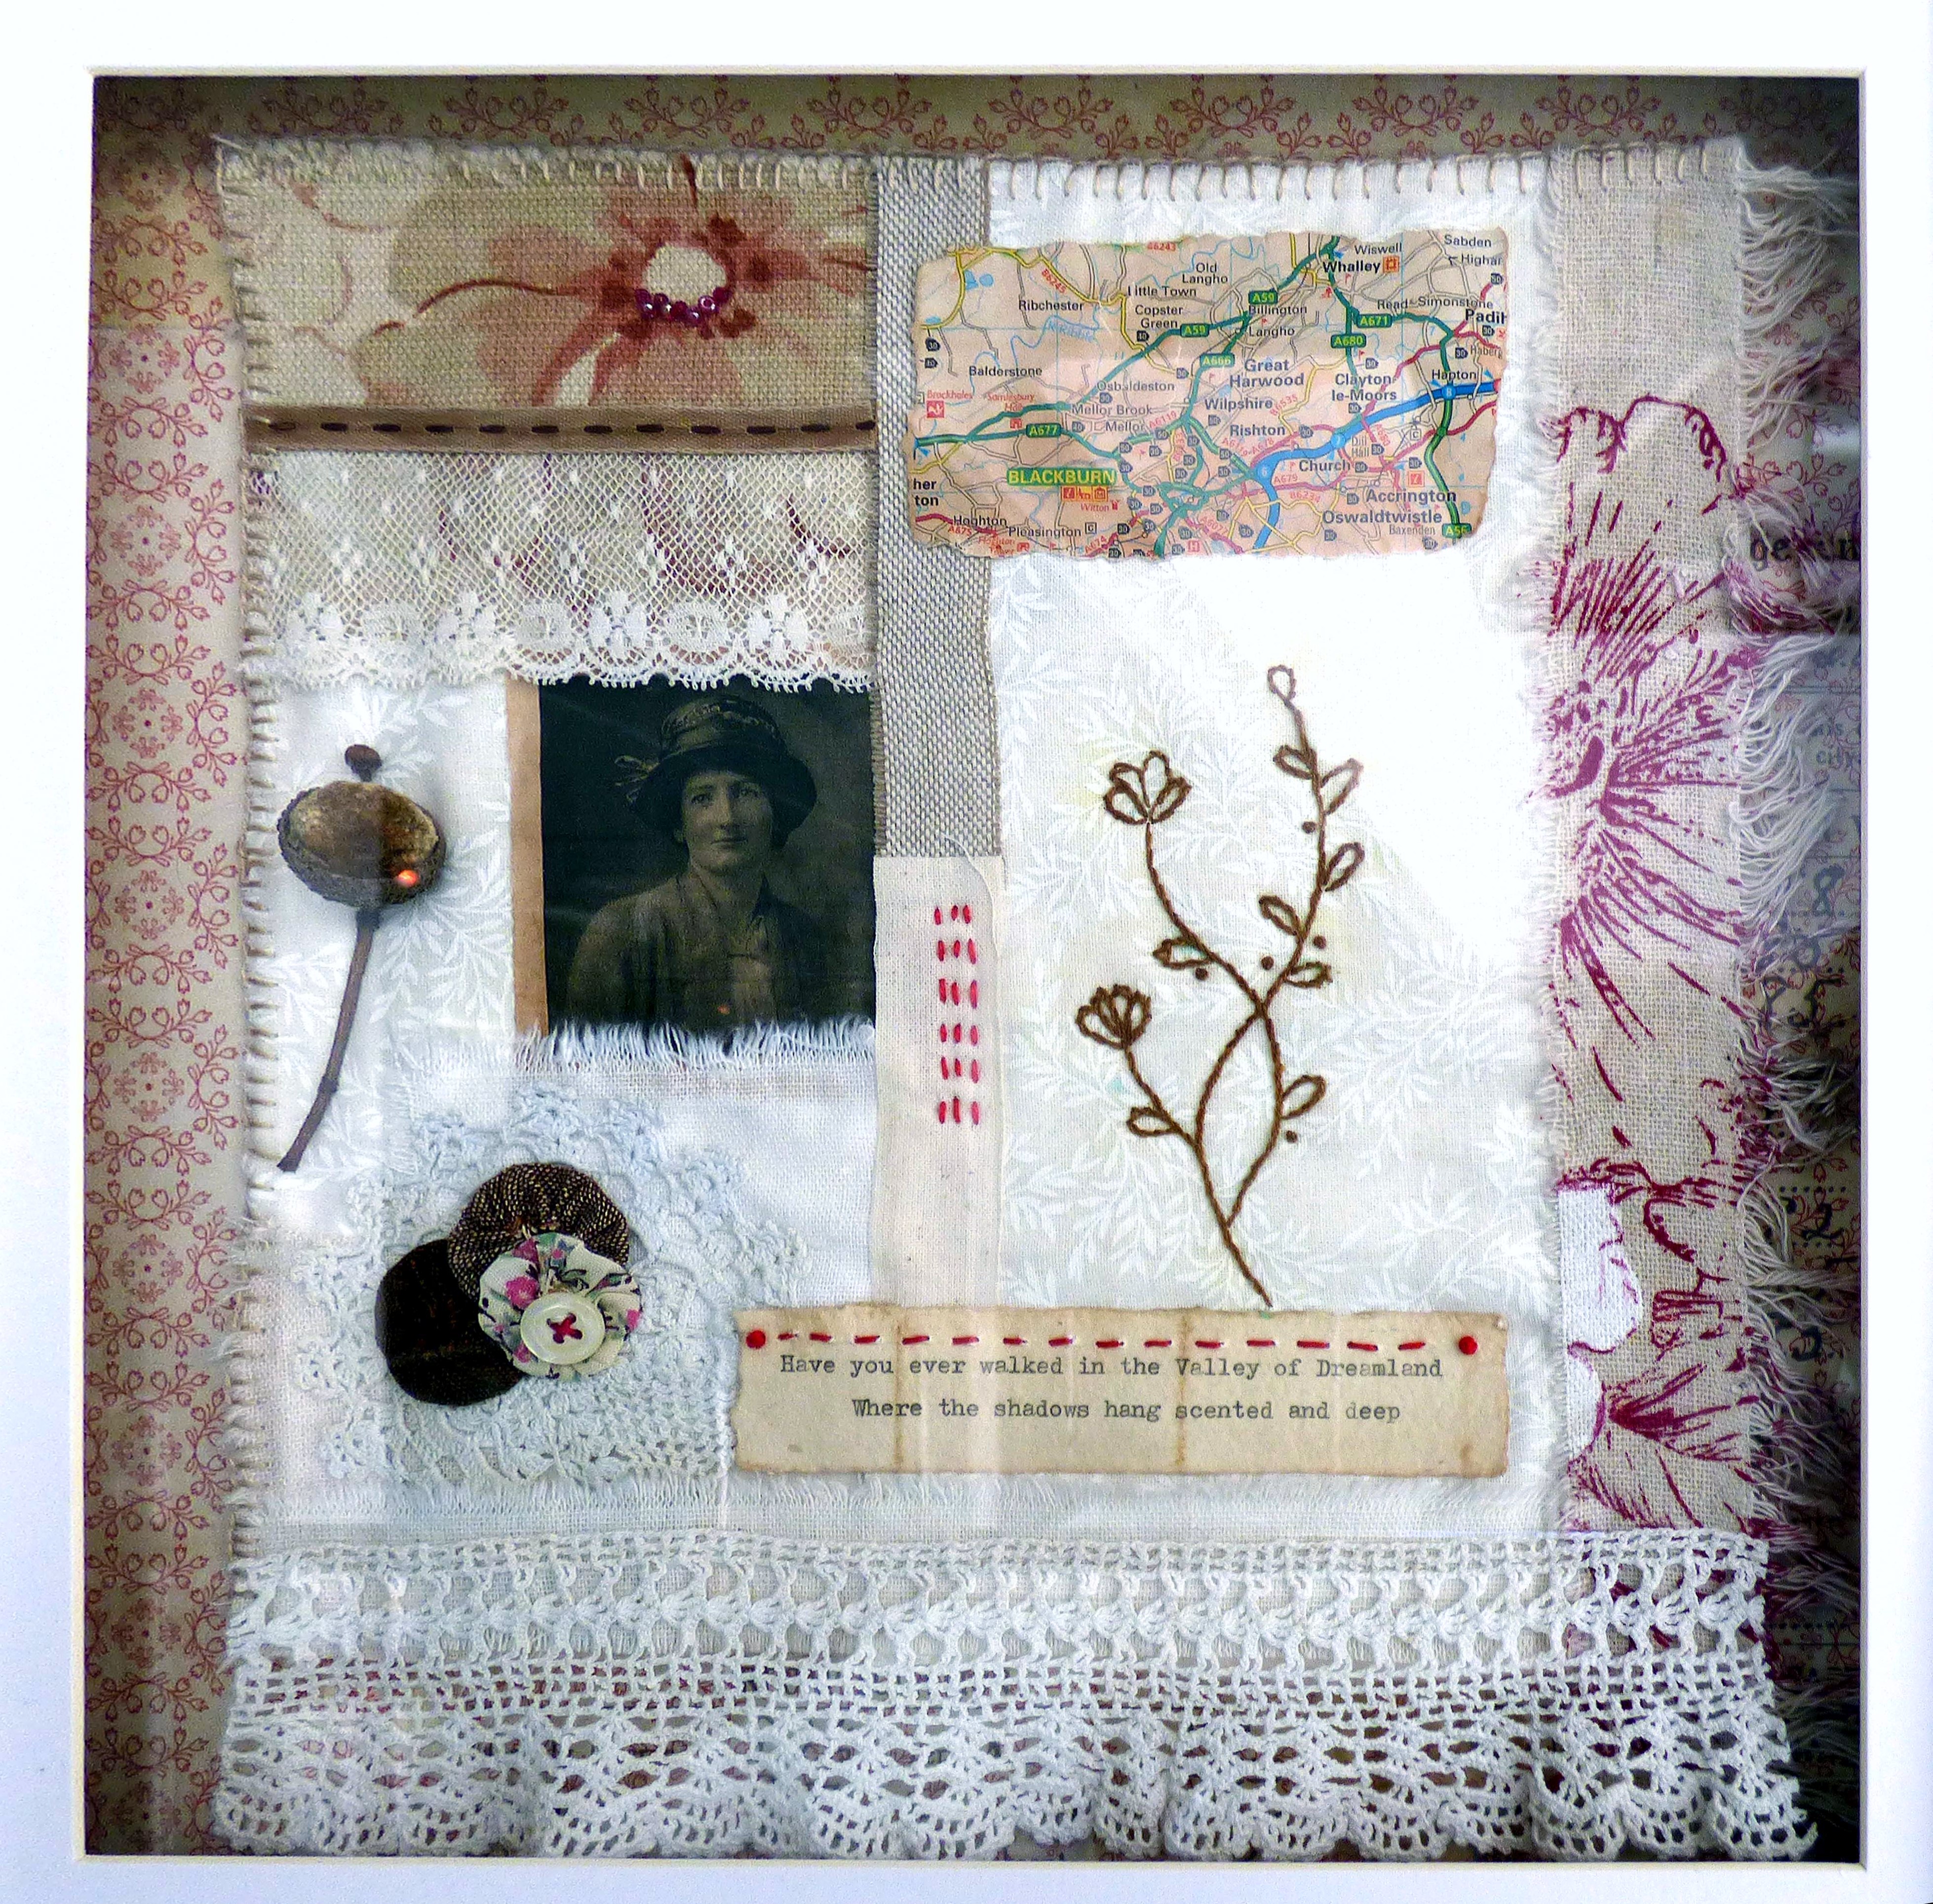 THE VALLEY OF DREAMS (peom by Ethel Carnie Holdsworth from Voices of Womanhood) by Julei Kent, mixed media, collage hand stitching,  "Synergy" exhibition by Preston Threads, July 2021